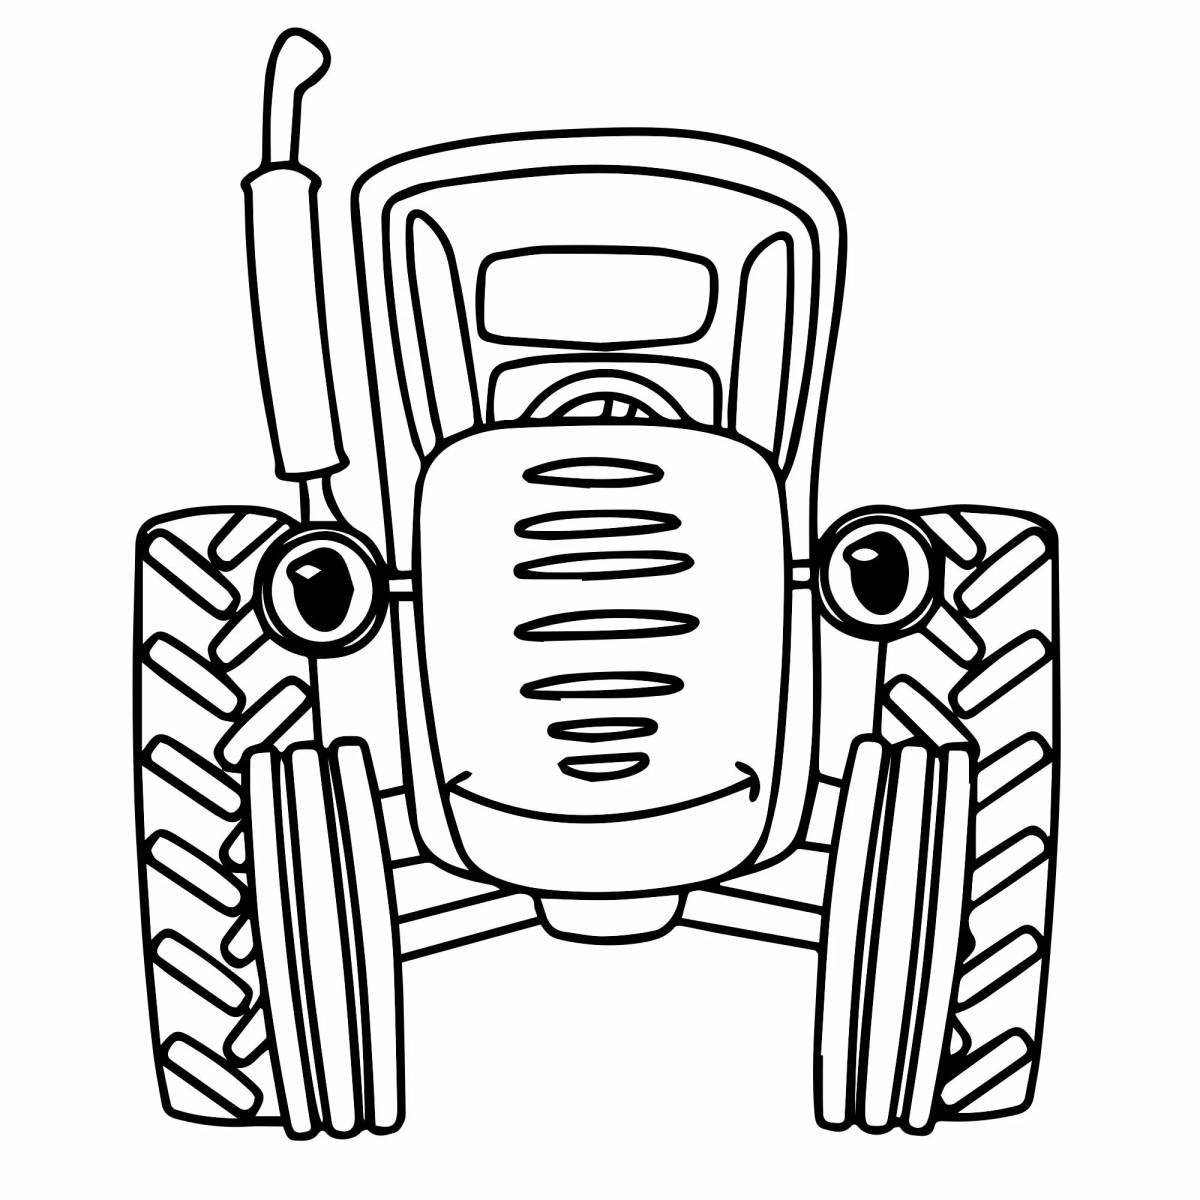 Animated blue tractor animals coloring book